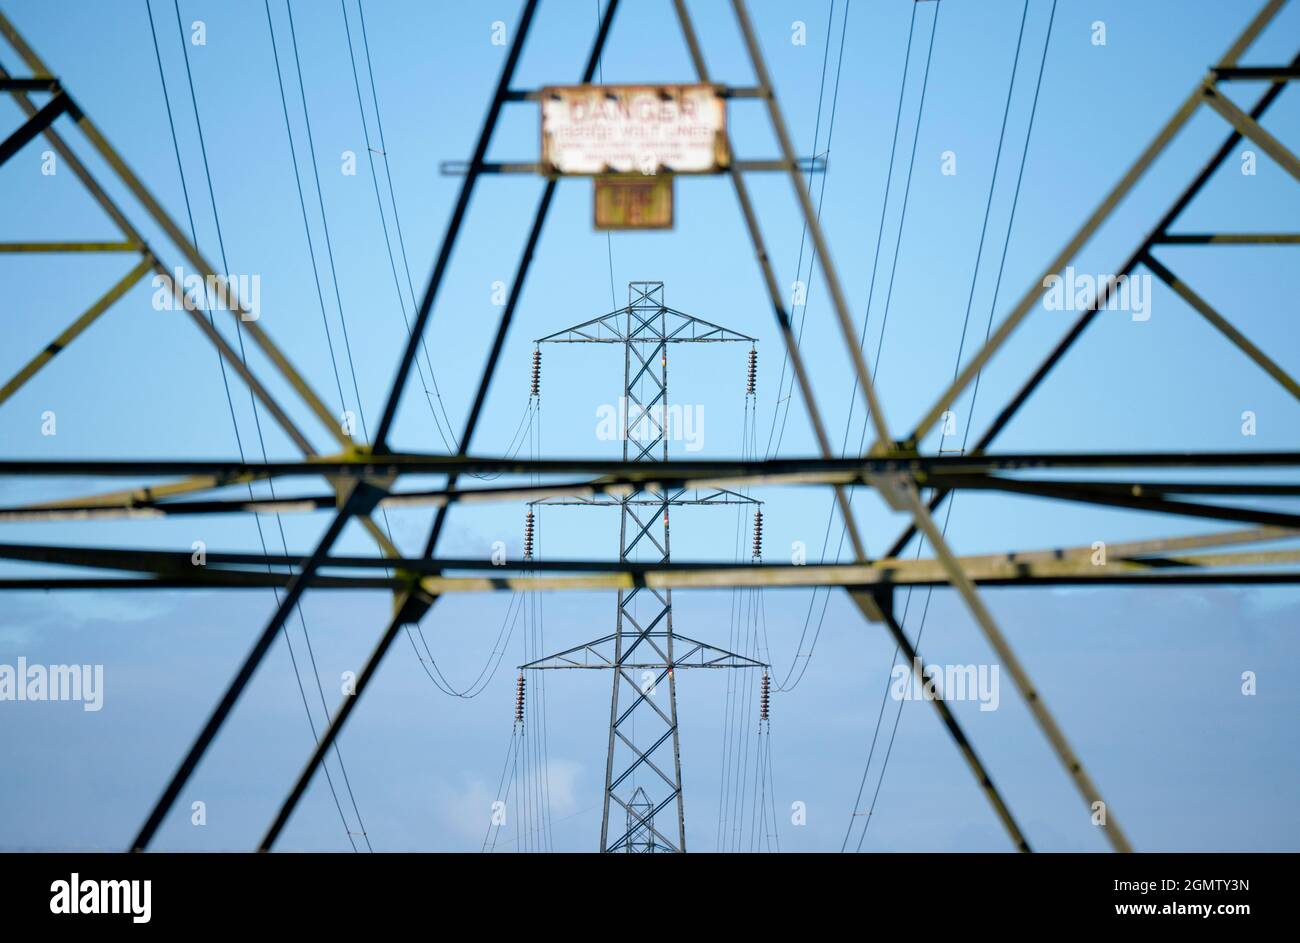 Oxfordshire, England - 28 July 2020; no people in view.    I love electricity pylons; I find their abstract, gaunt shapes endlessly fascinating. Here Stock Photo